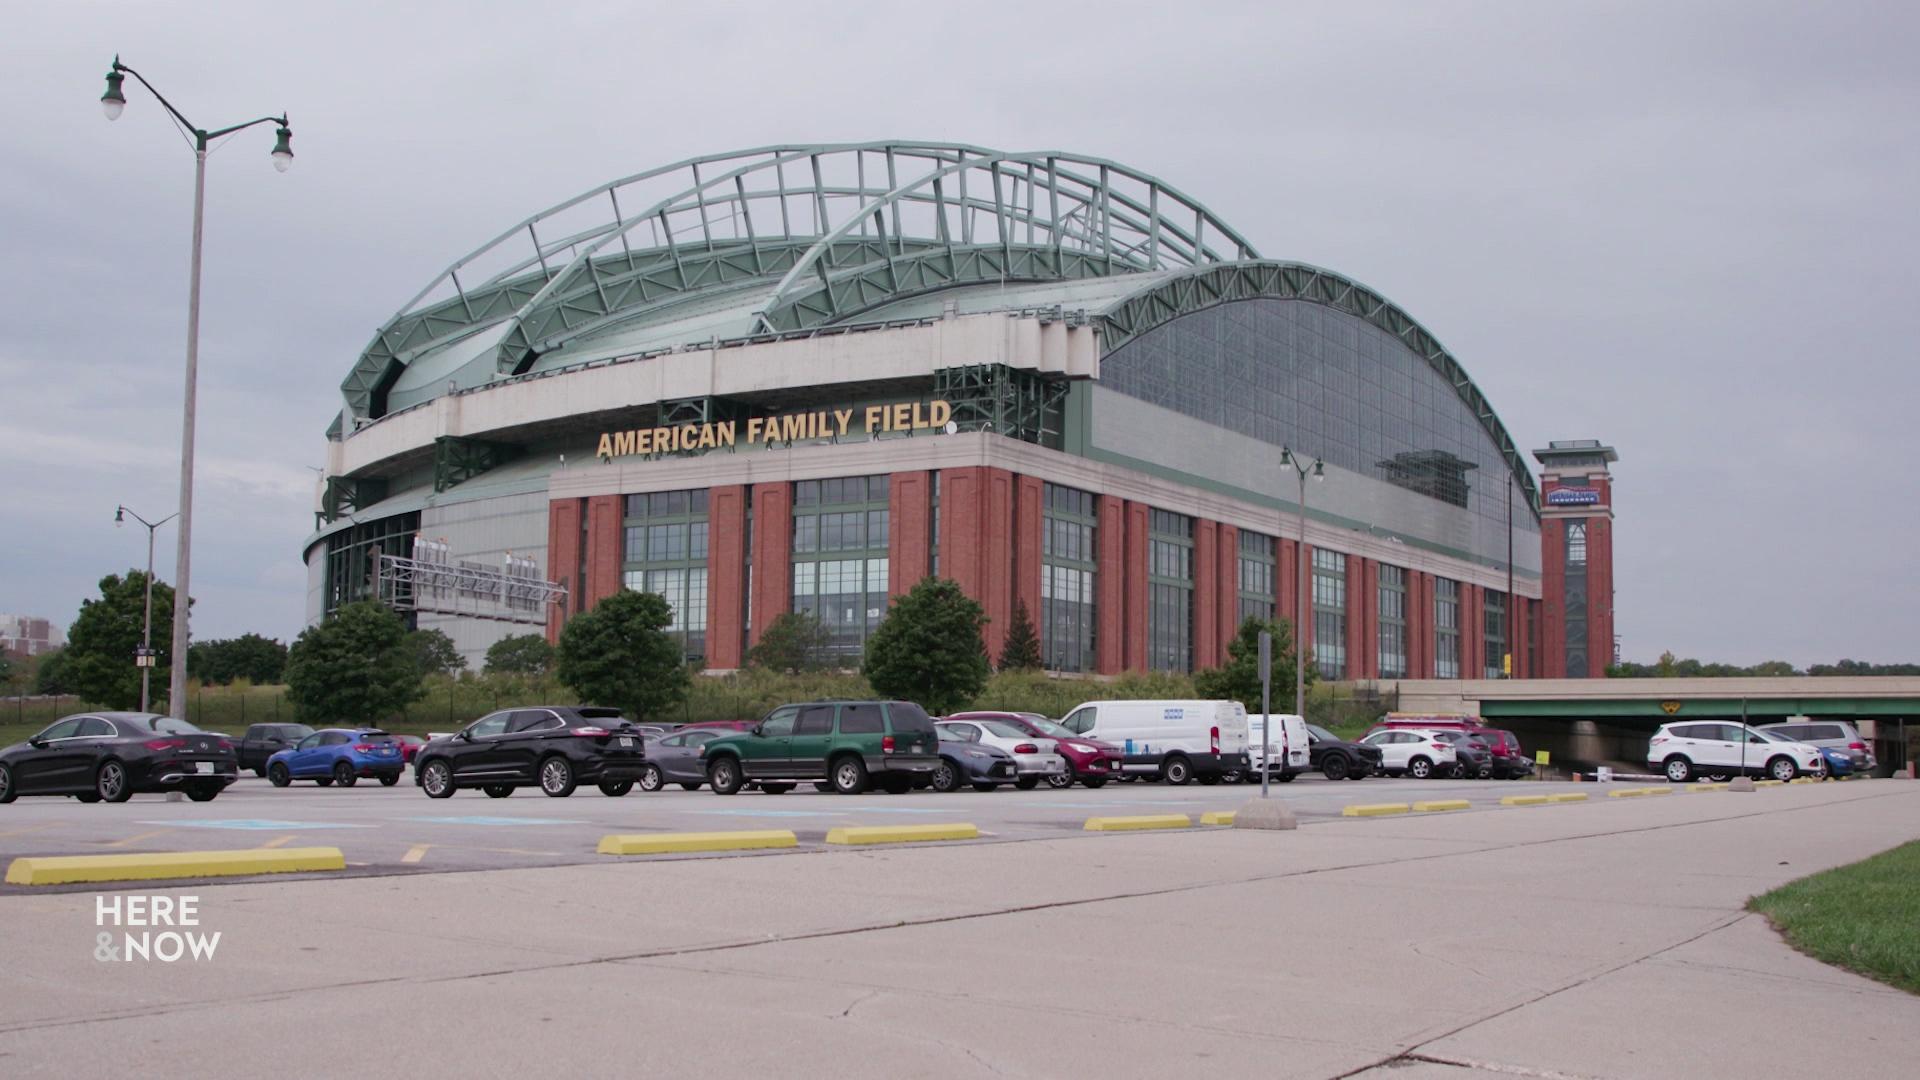 A wide shot shows the 'American Family Field' stadium from a street view.